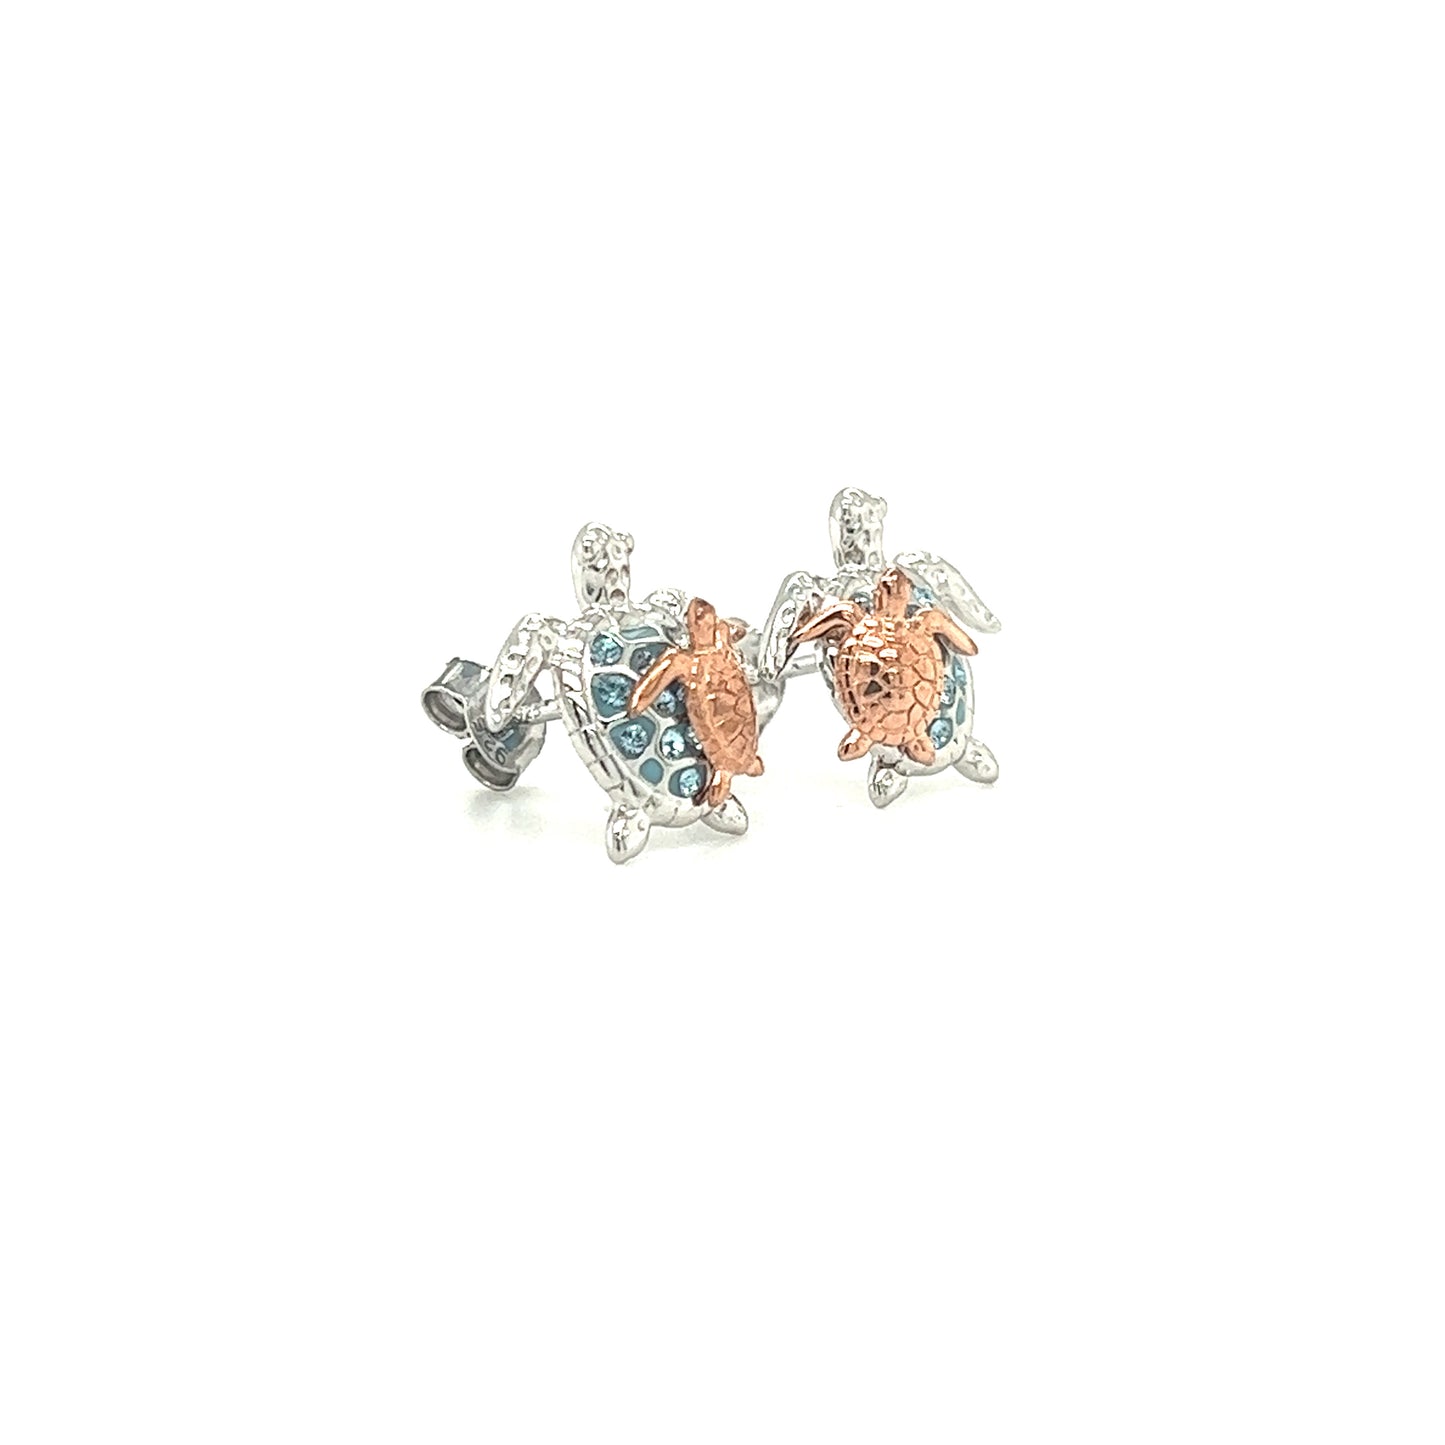 Sea Turtle Stud Earrings with Rose Gold Accents and Aqua Crystals in Sterling Silver Left Side View